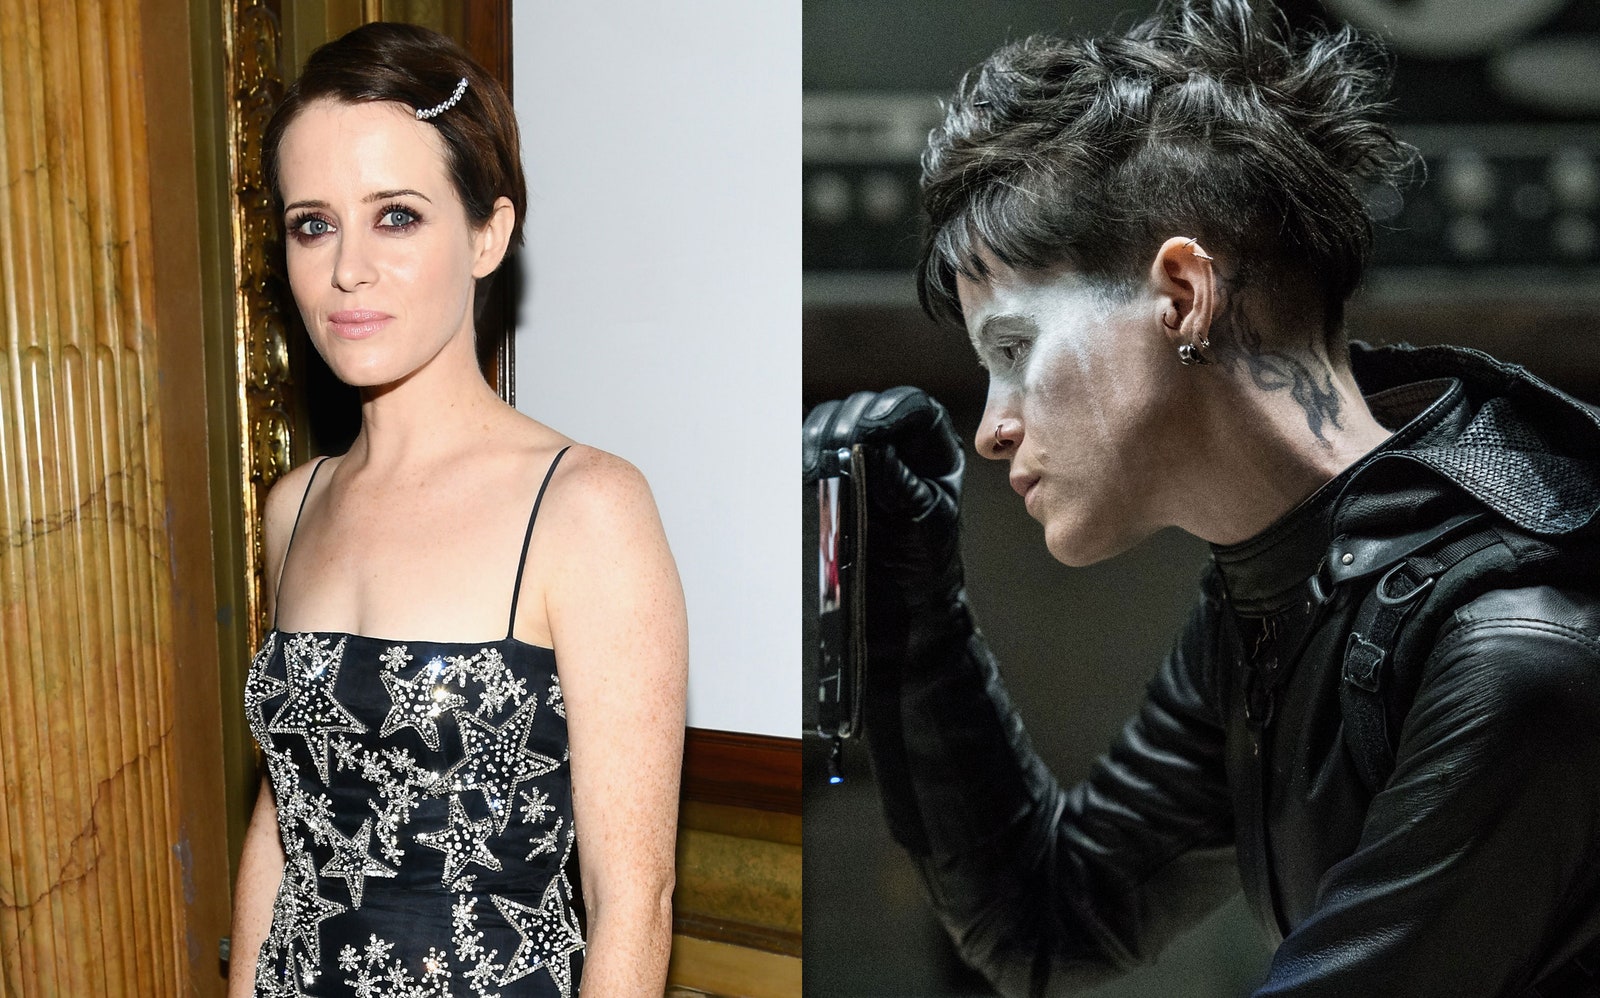 Claire Foy In The Girl In The Spiders Web 2018 Movie Wallpapers